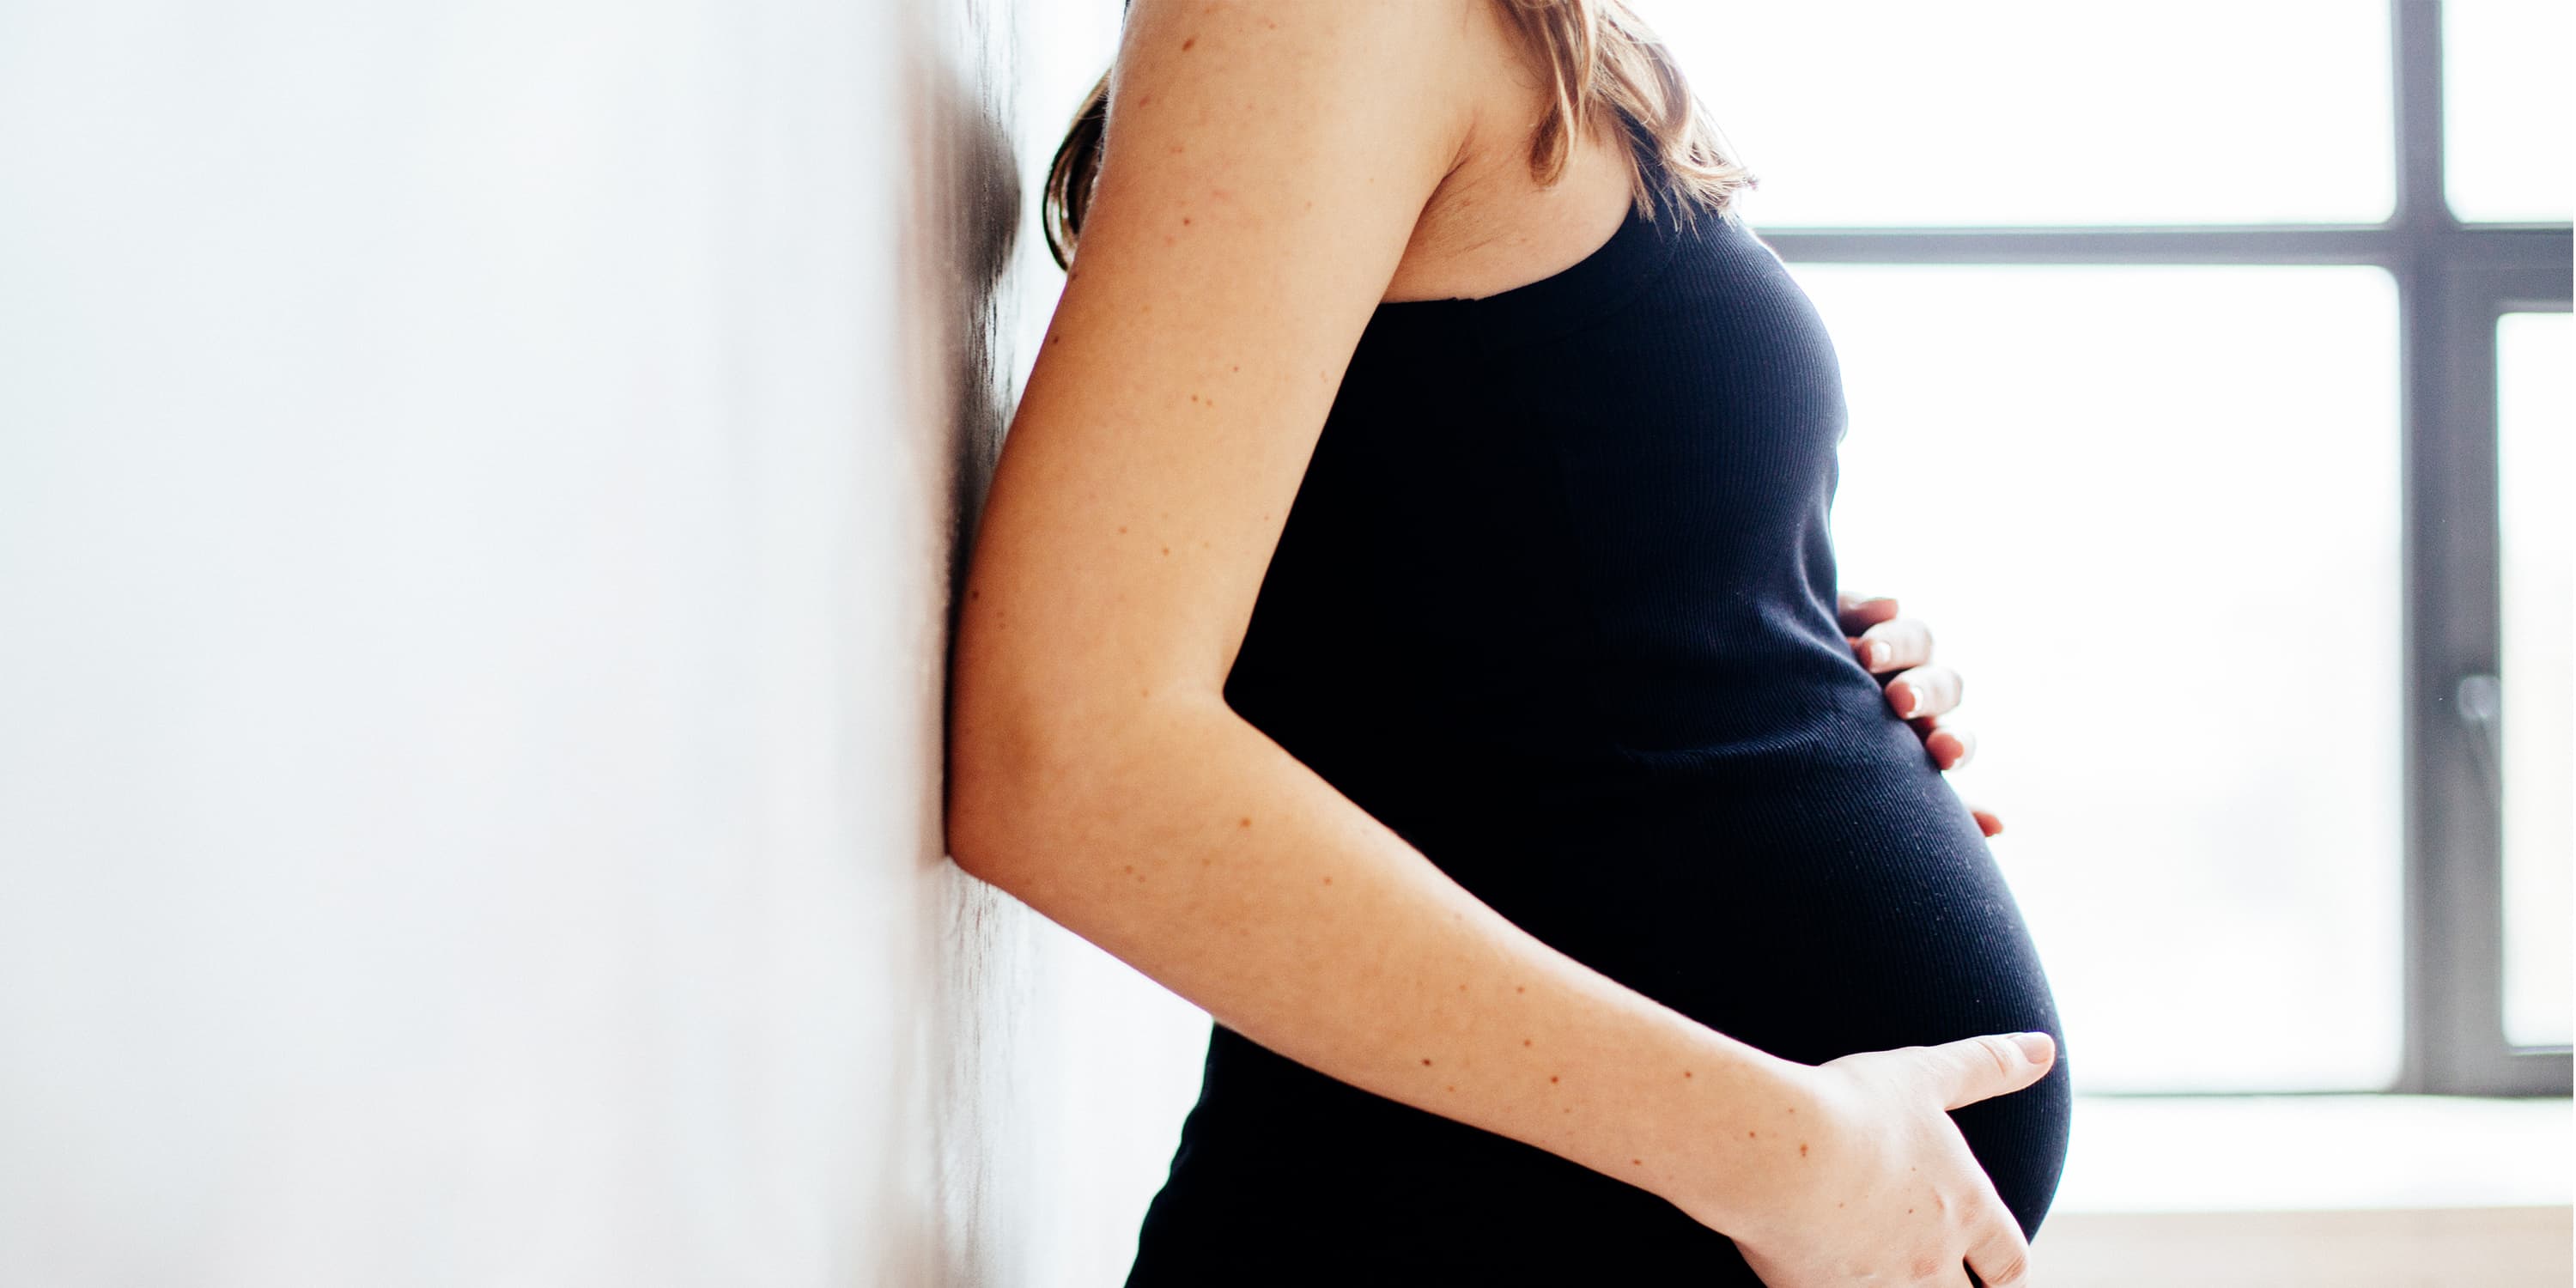 Side view, pregnant woman leans against the wall and puts hands on her belly